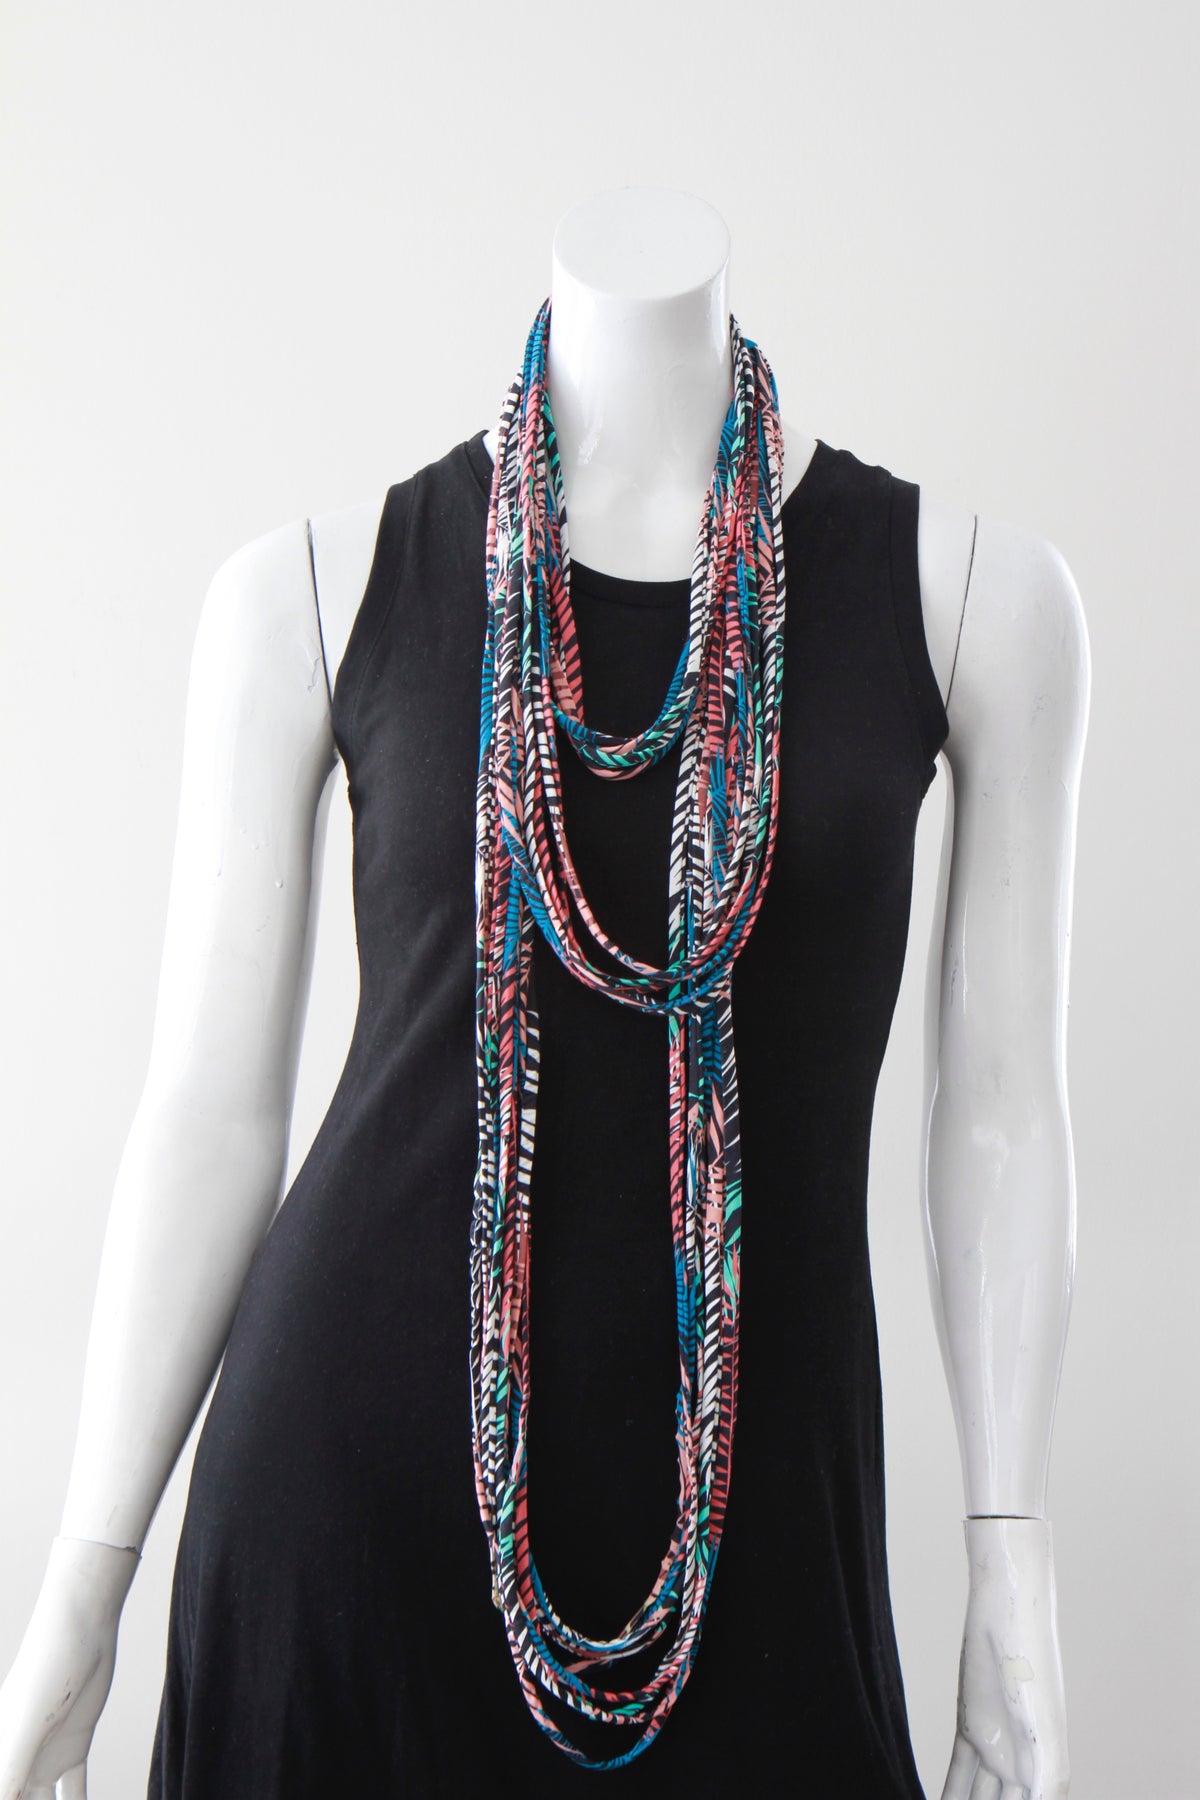 Multi-Color Leaf Print Infinity Scarf Necklace in &#39;Carnivale&#39; Print